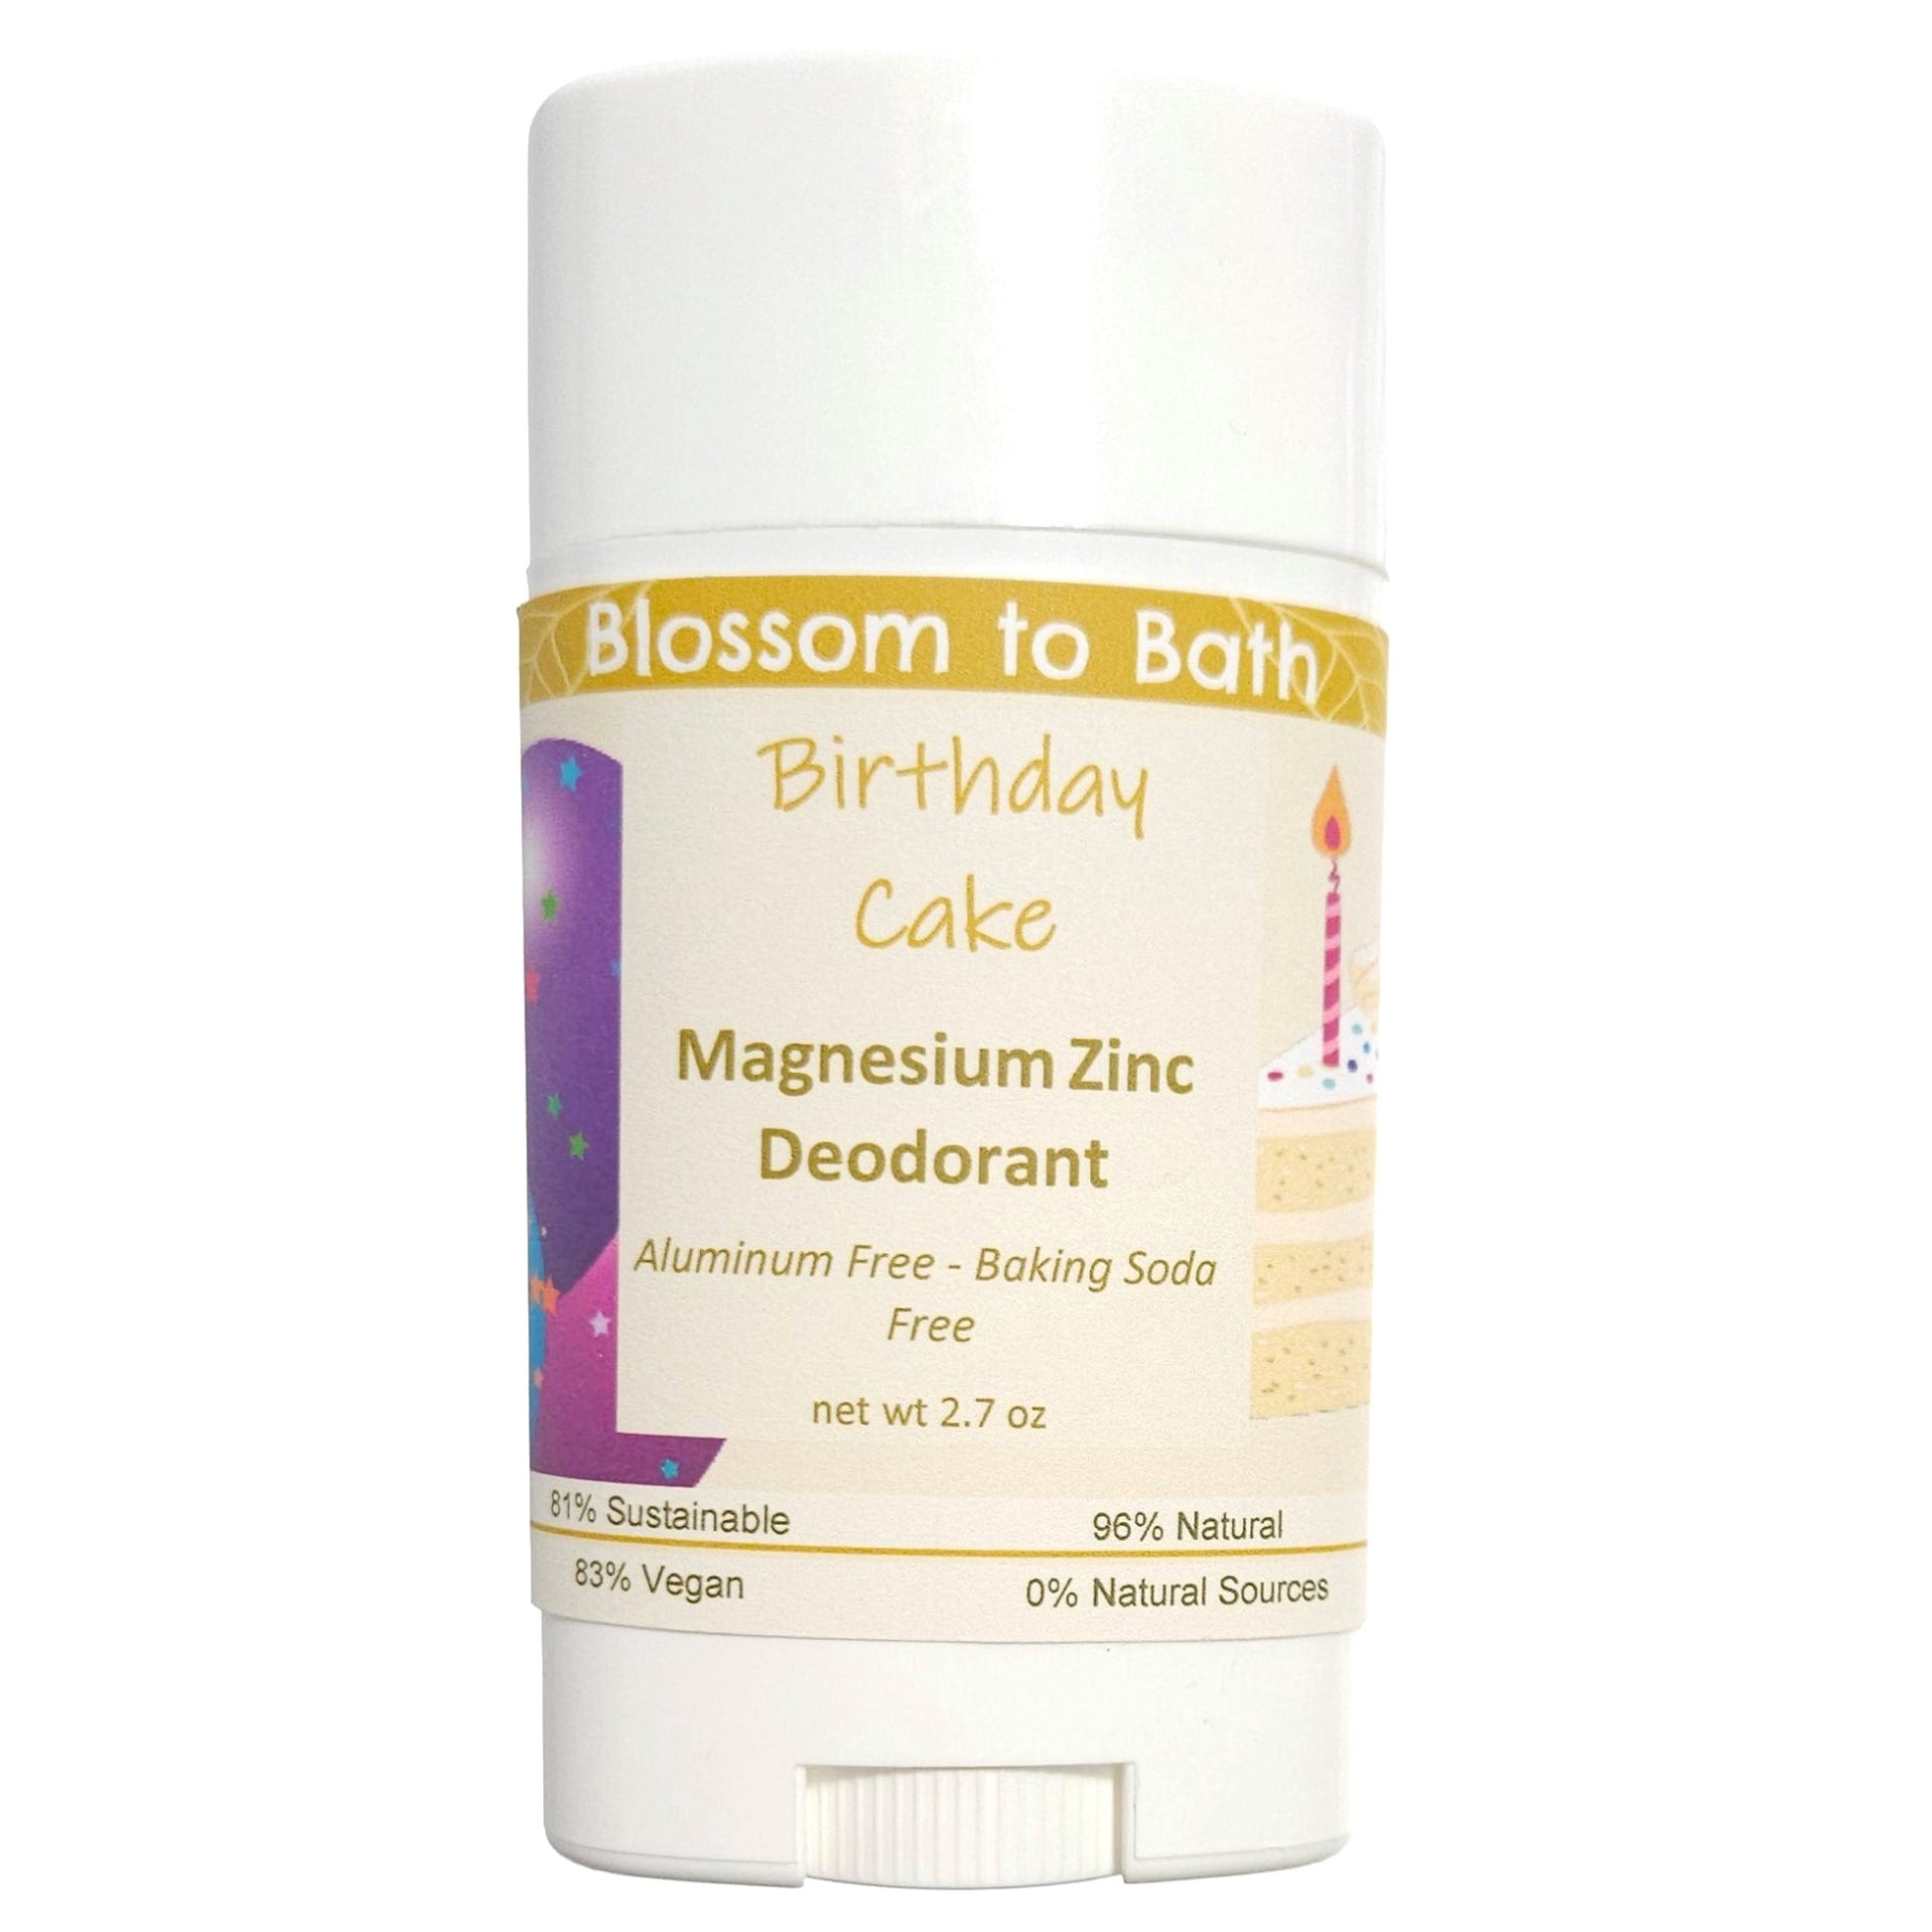 Buy Blossom to Bath Birthday Cake Magnesium Zinc Deodorant from Flowersong Soap Studio.  Long lasting protection made from organic botanicals and butters, made without baking soda, tested in the Arizona heat  The essence of a vanilla buttercream frosted birthday cake.